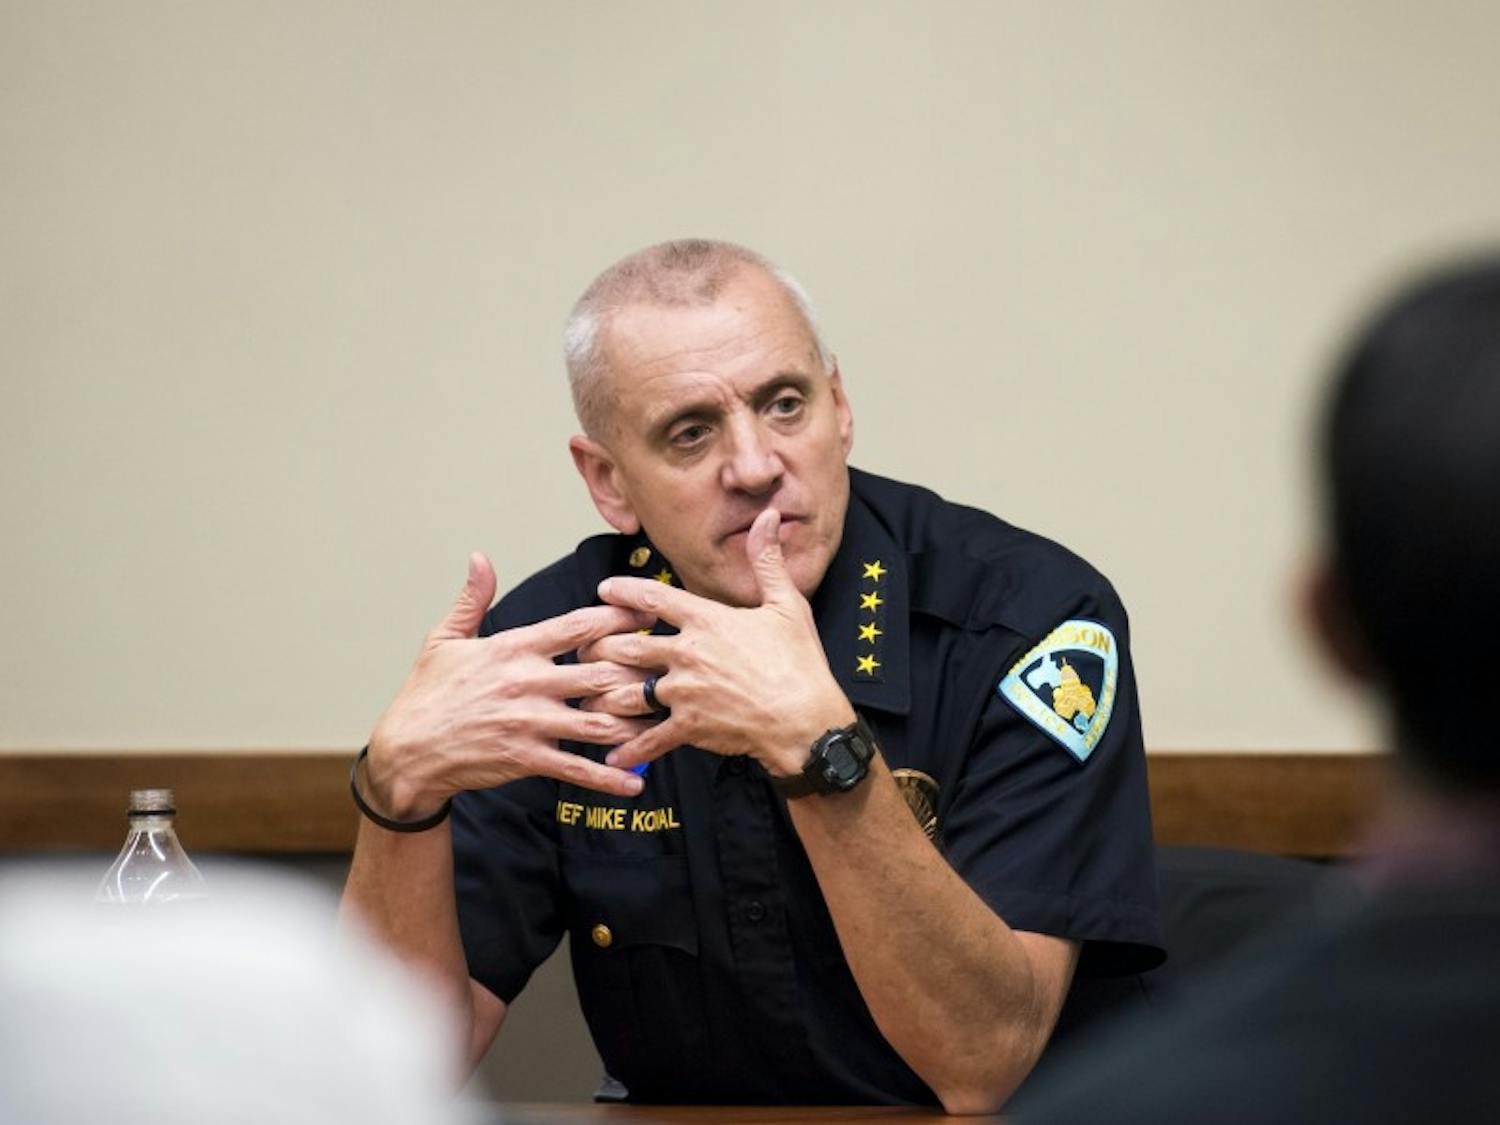 Madison Police Department Chief Mike Koval was cited for misconduct by the Police and Fire Commission Wednesday, after calling the grandmother of Tony Robinson&mdash;a teen shot and killed by an MPD officer in 2015&mdash;a “raging lunatic.”